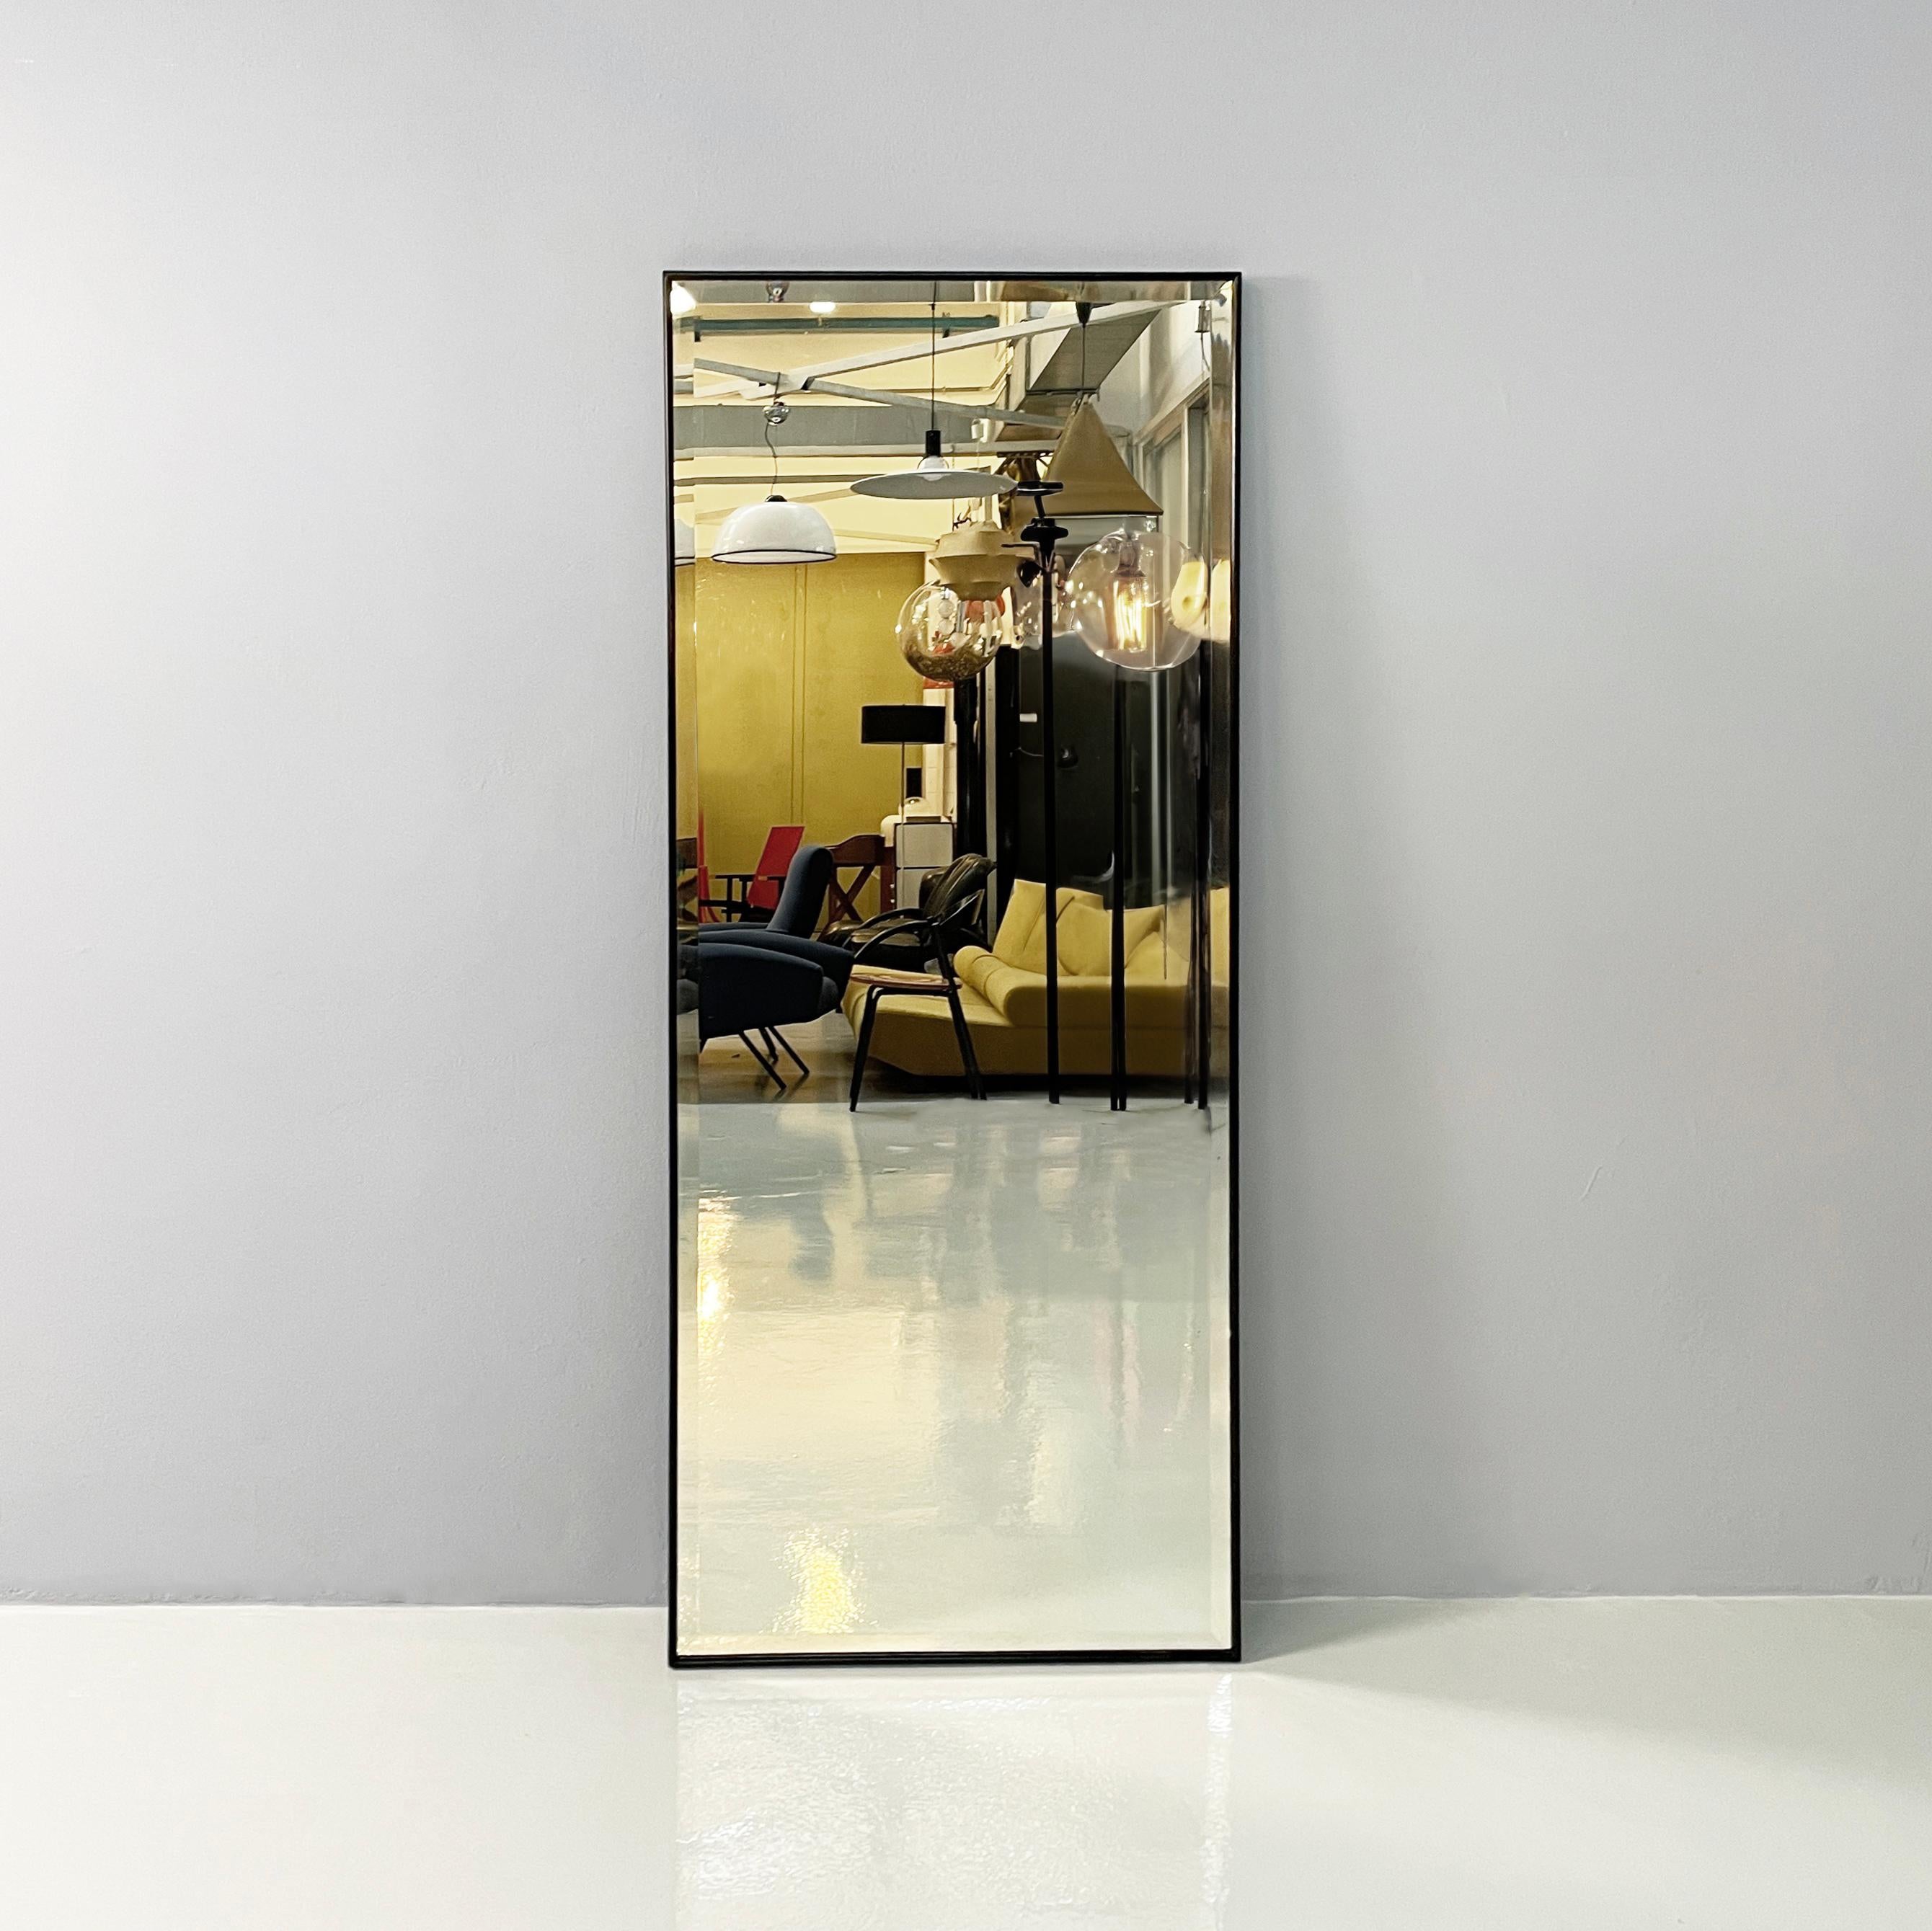 Italian modern Rectangular mirror with black wooden frame, 1990s
Rectangular wall mirror with a rounded profile frame in black painted wood. The structure is entirely made of solid wood. The peculiarity of this mirror is that it can be hung both